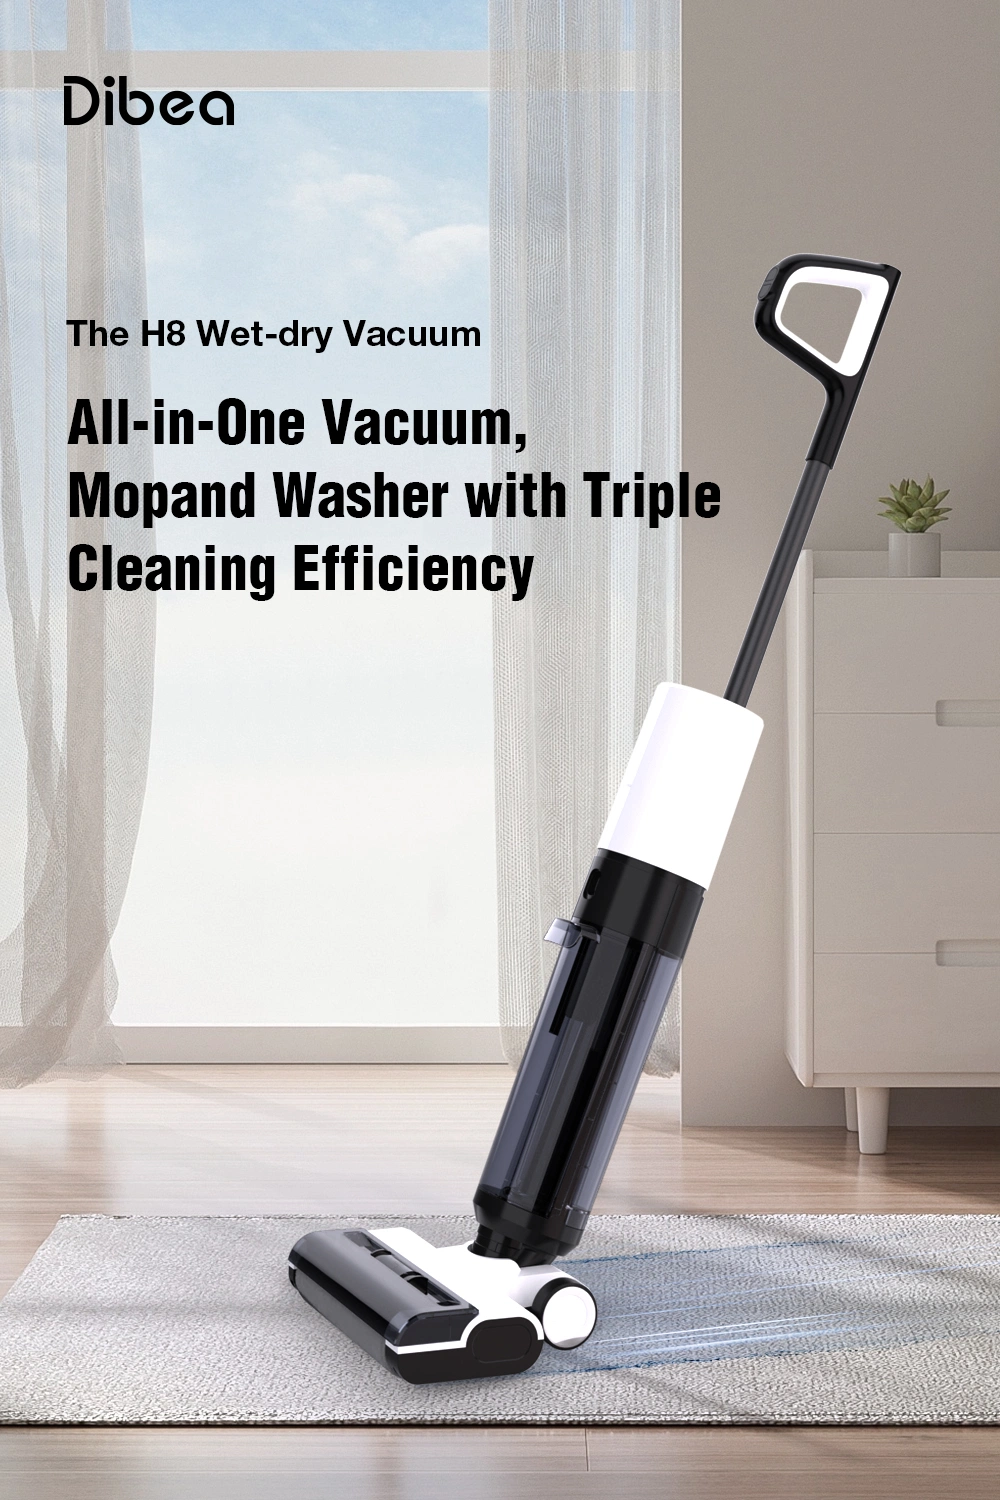 Dibea Hc26 Wet Dry Vacuum Cordless Floor Cleaner and Mop One-Step Cleaning for Hard Floors